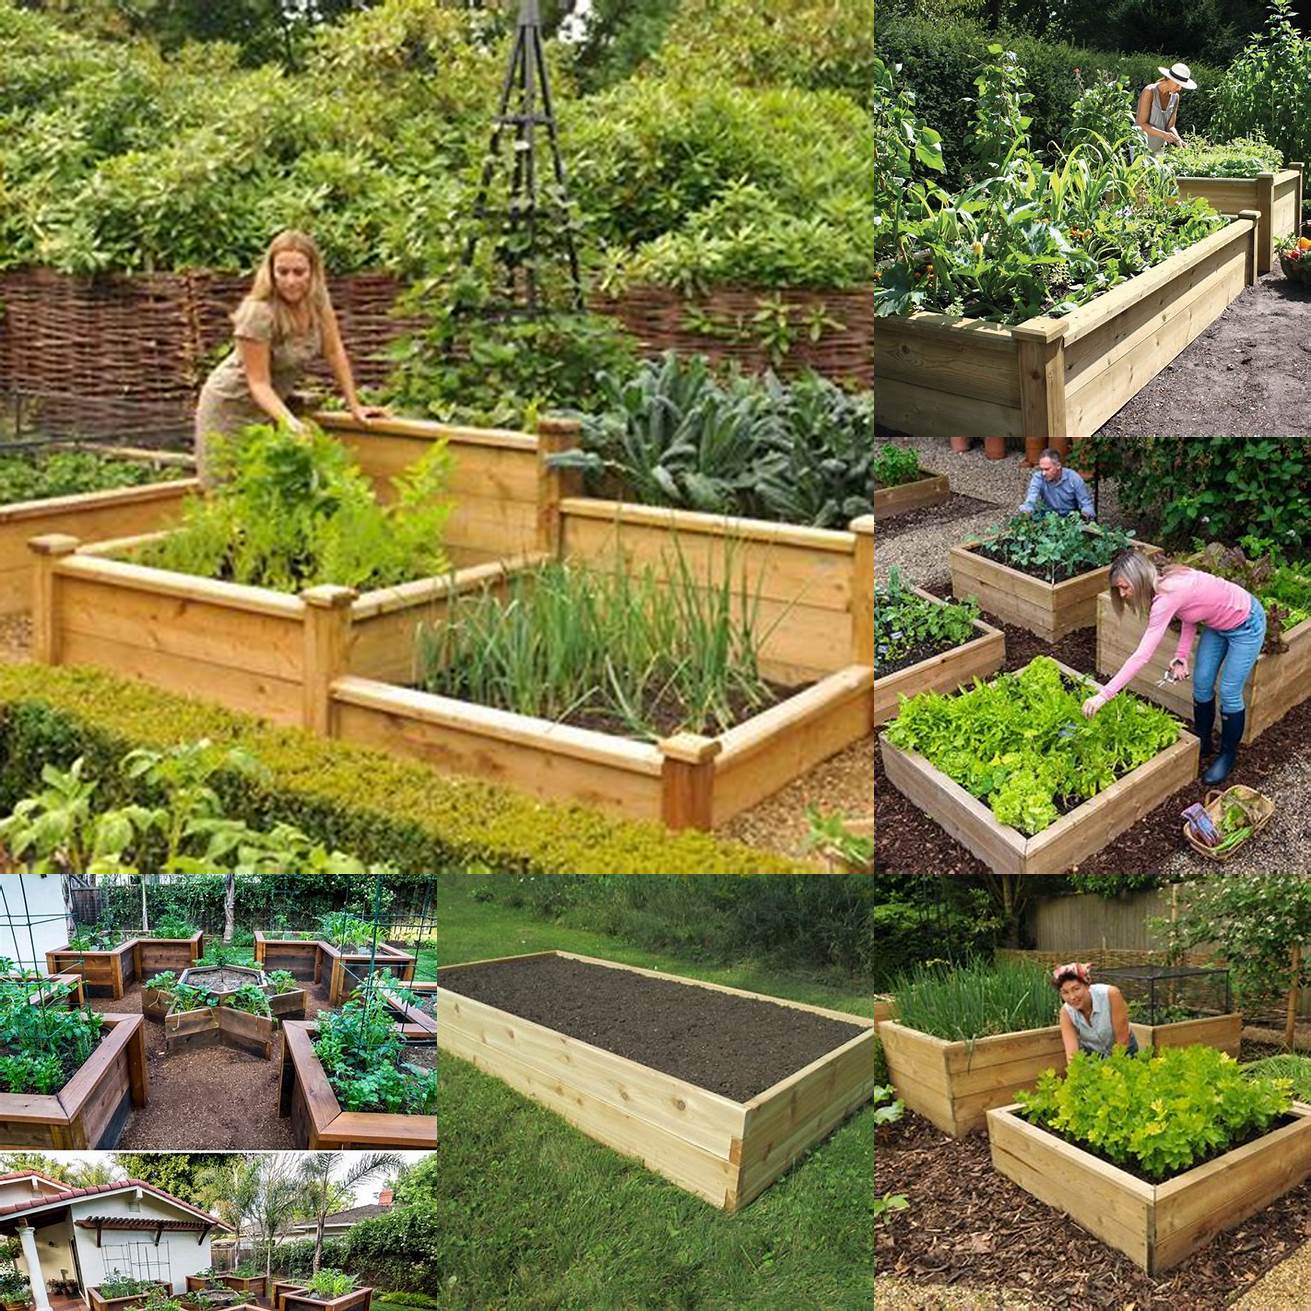 A rustic kitchen garden with raised beds and a wooden bench